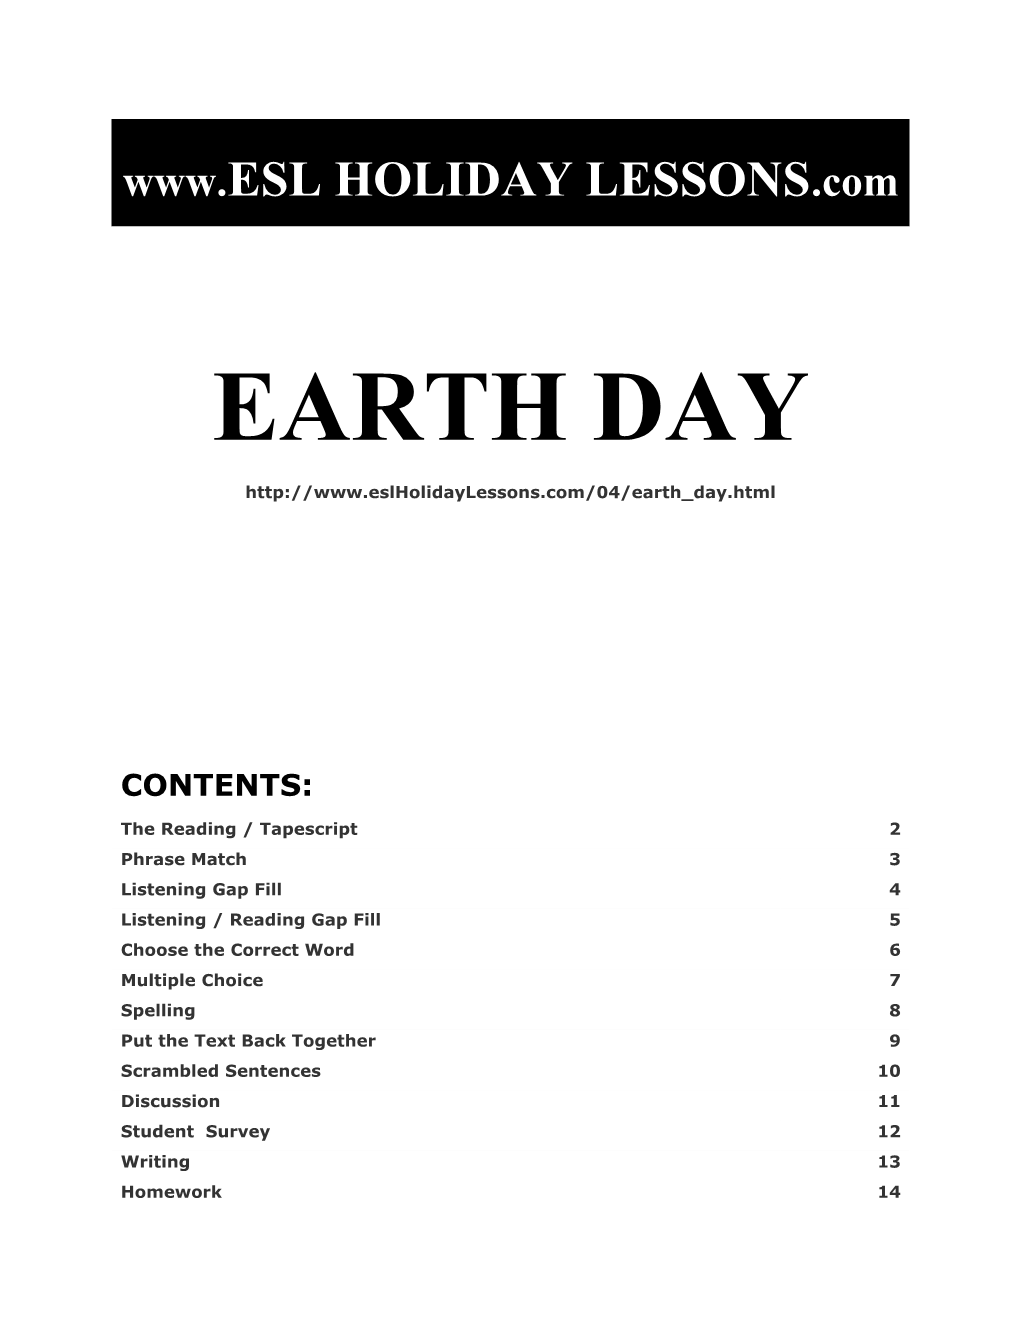 Holiday Lessons - Earth Day